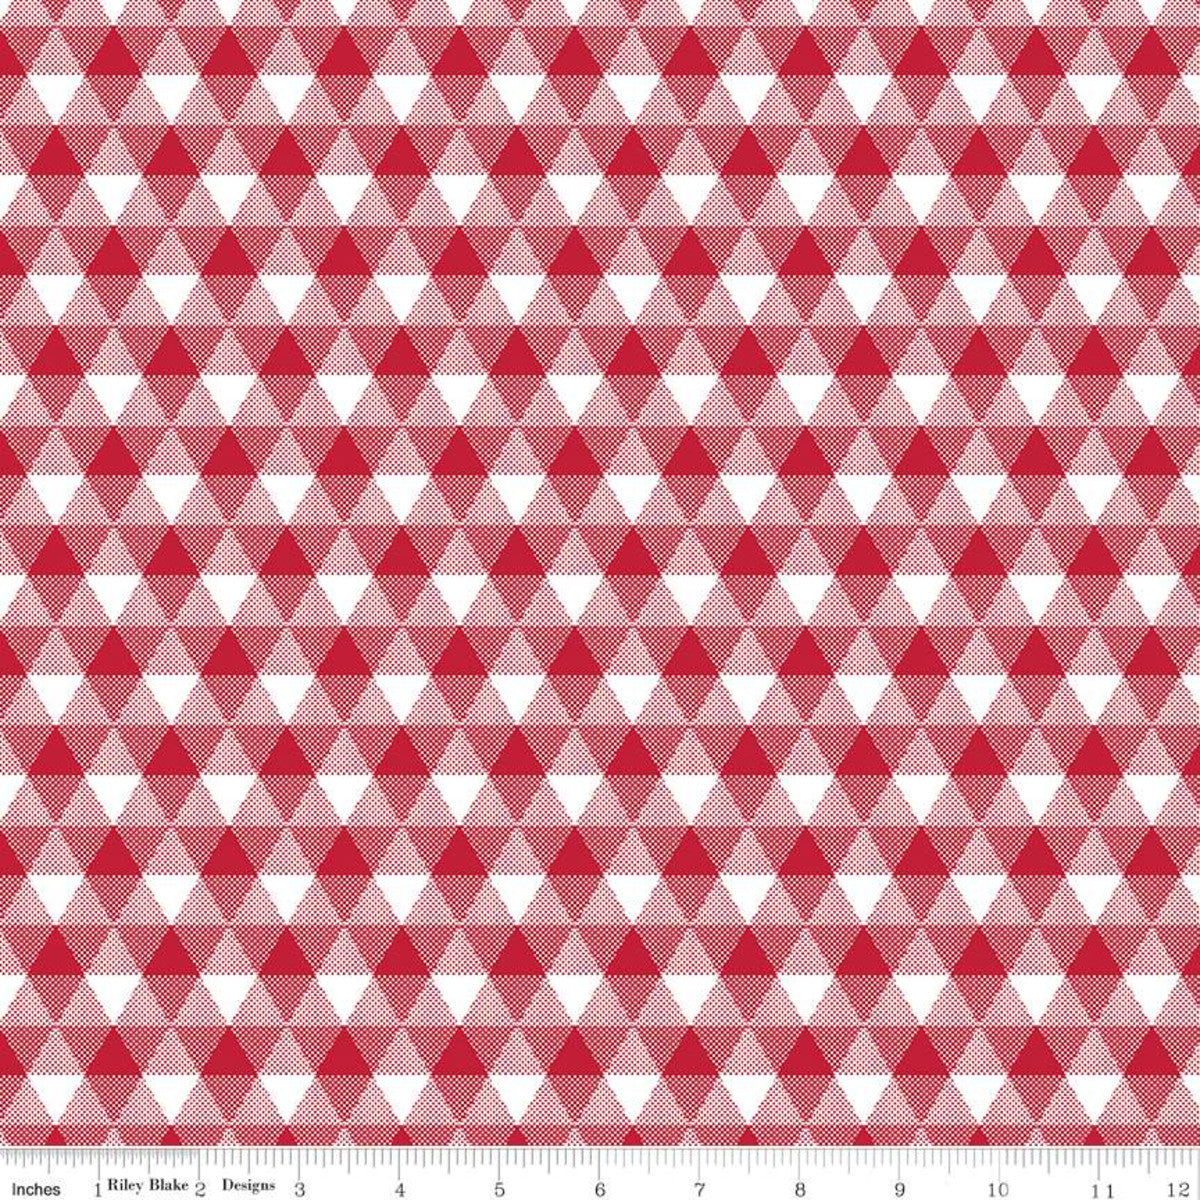 Land of Liberty - Triangle Gingham Red